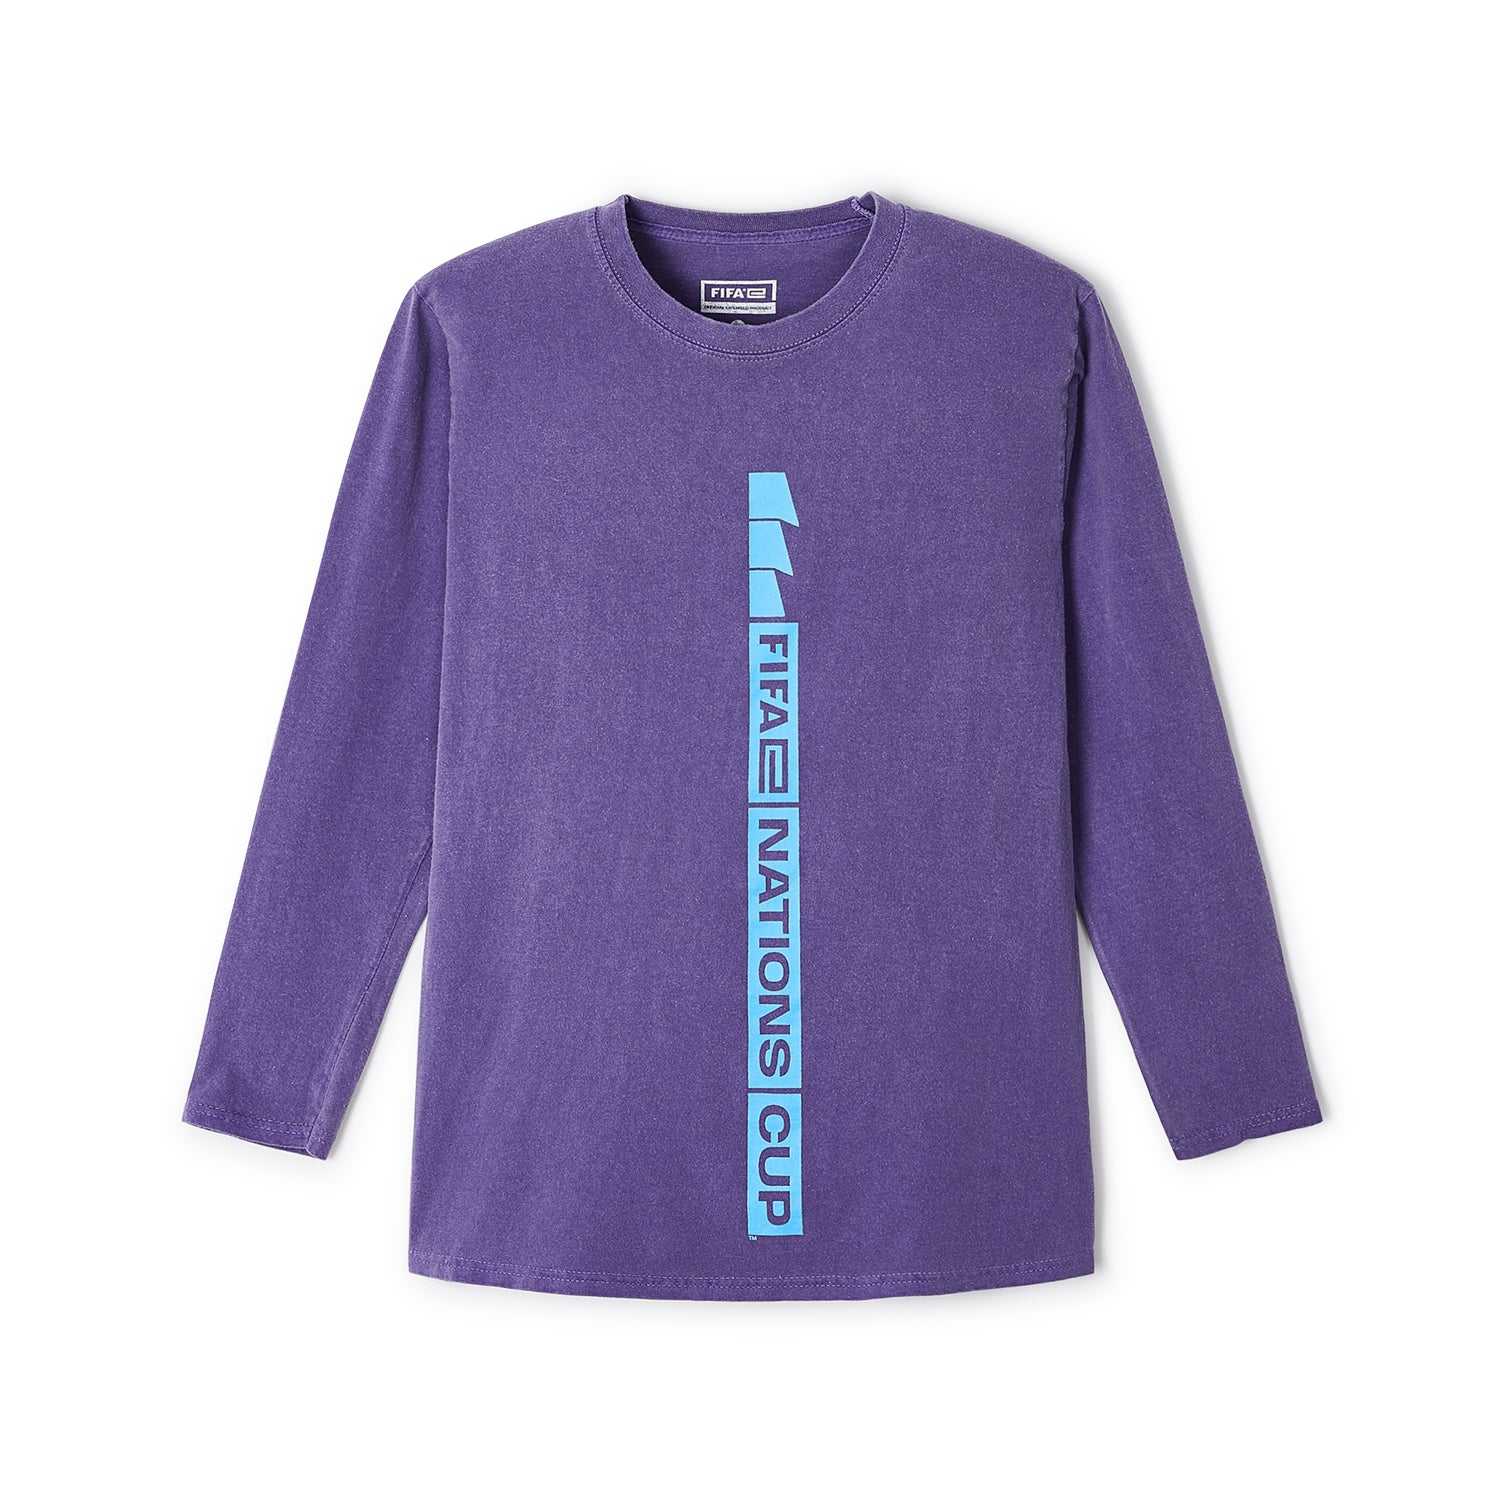 FIFAe Nations Cup Long Sleeve T-Shirt Purple - Men's